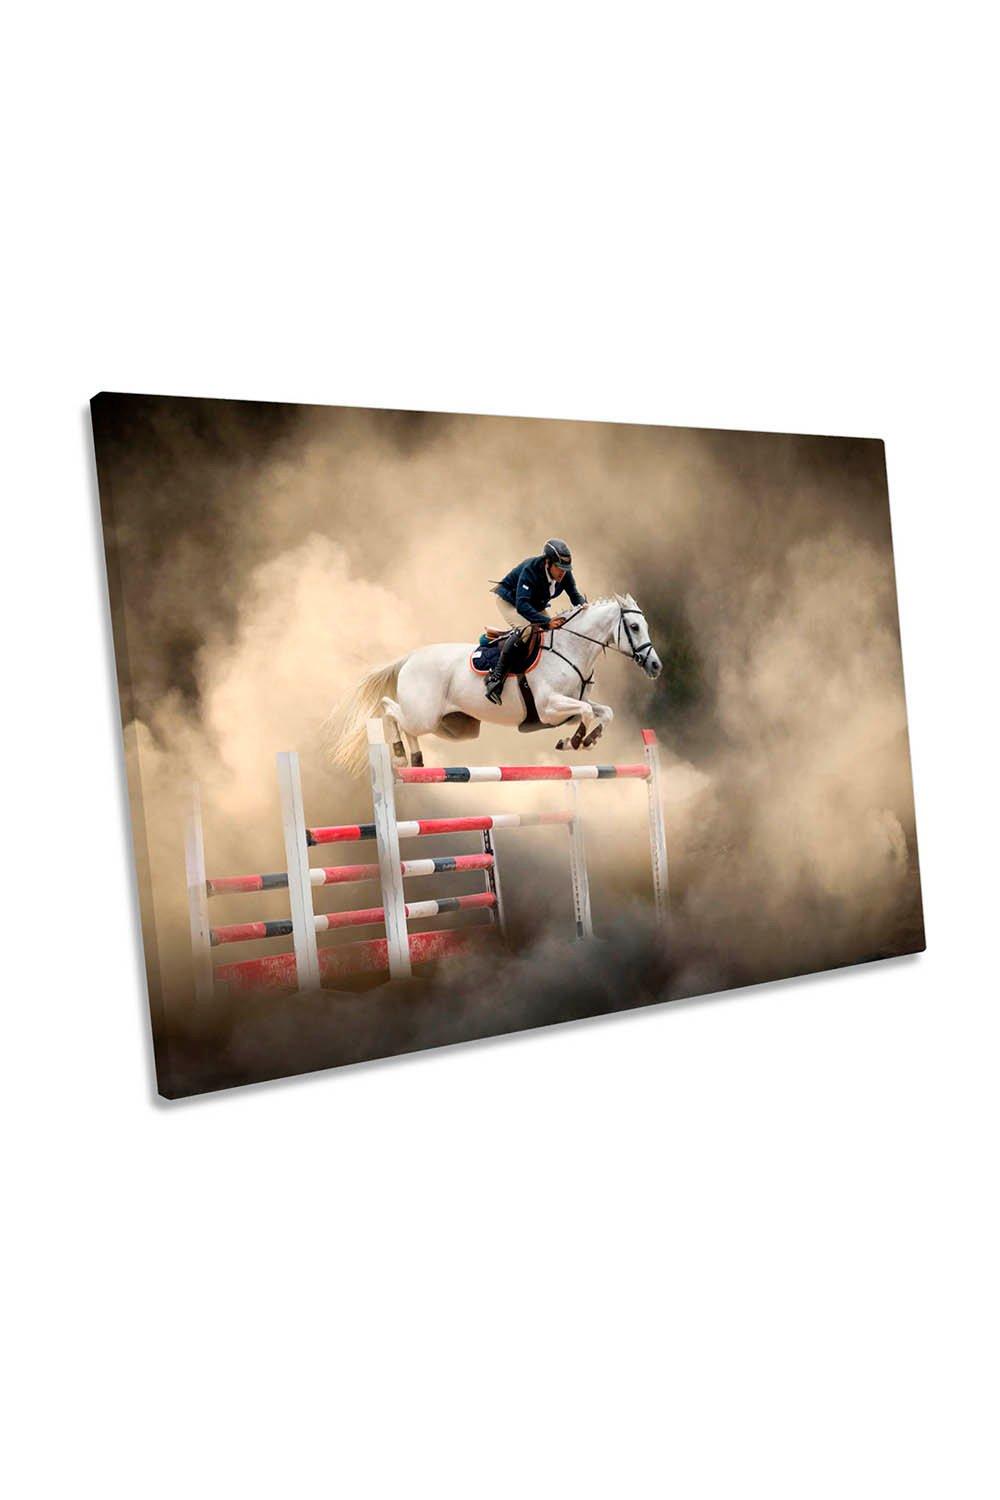 White Horse Show Jumping Sports Canvas Wall Art Picture Print